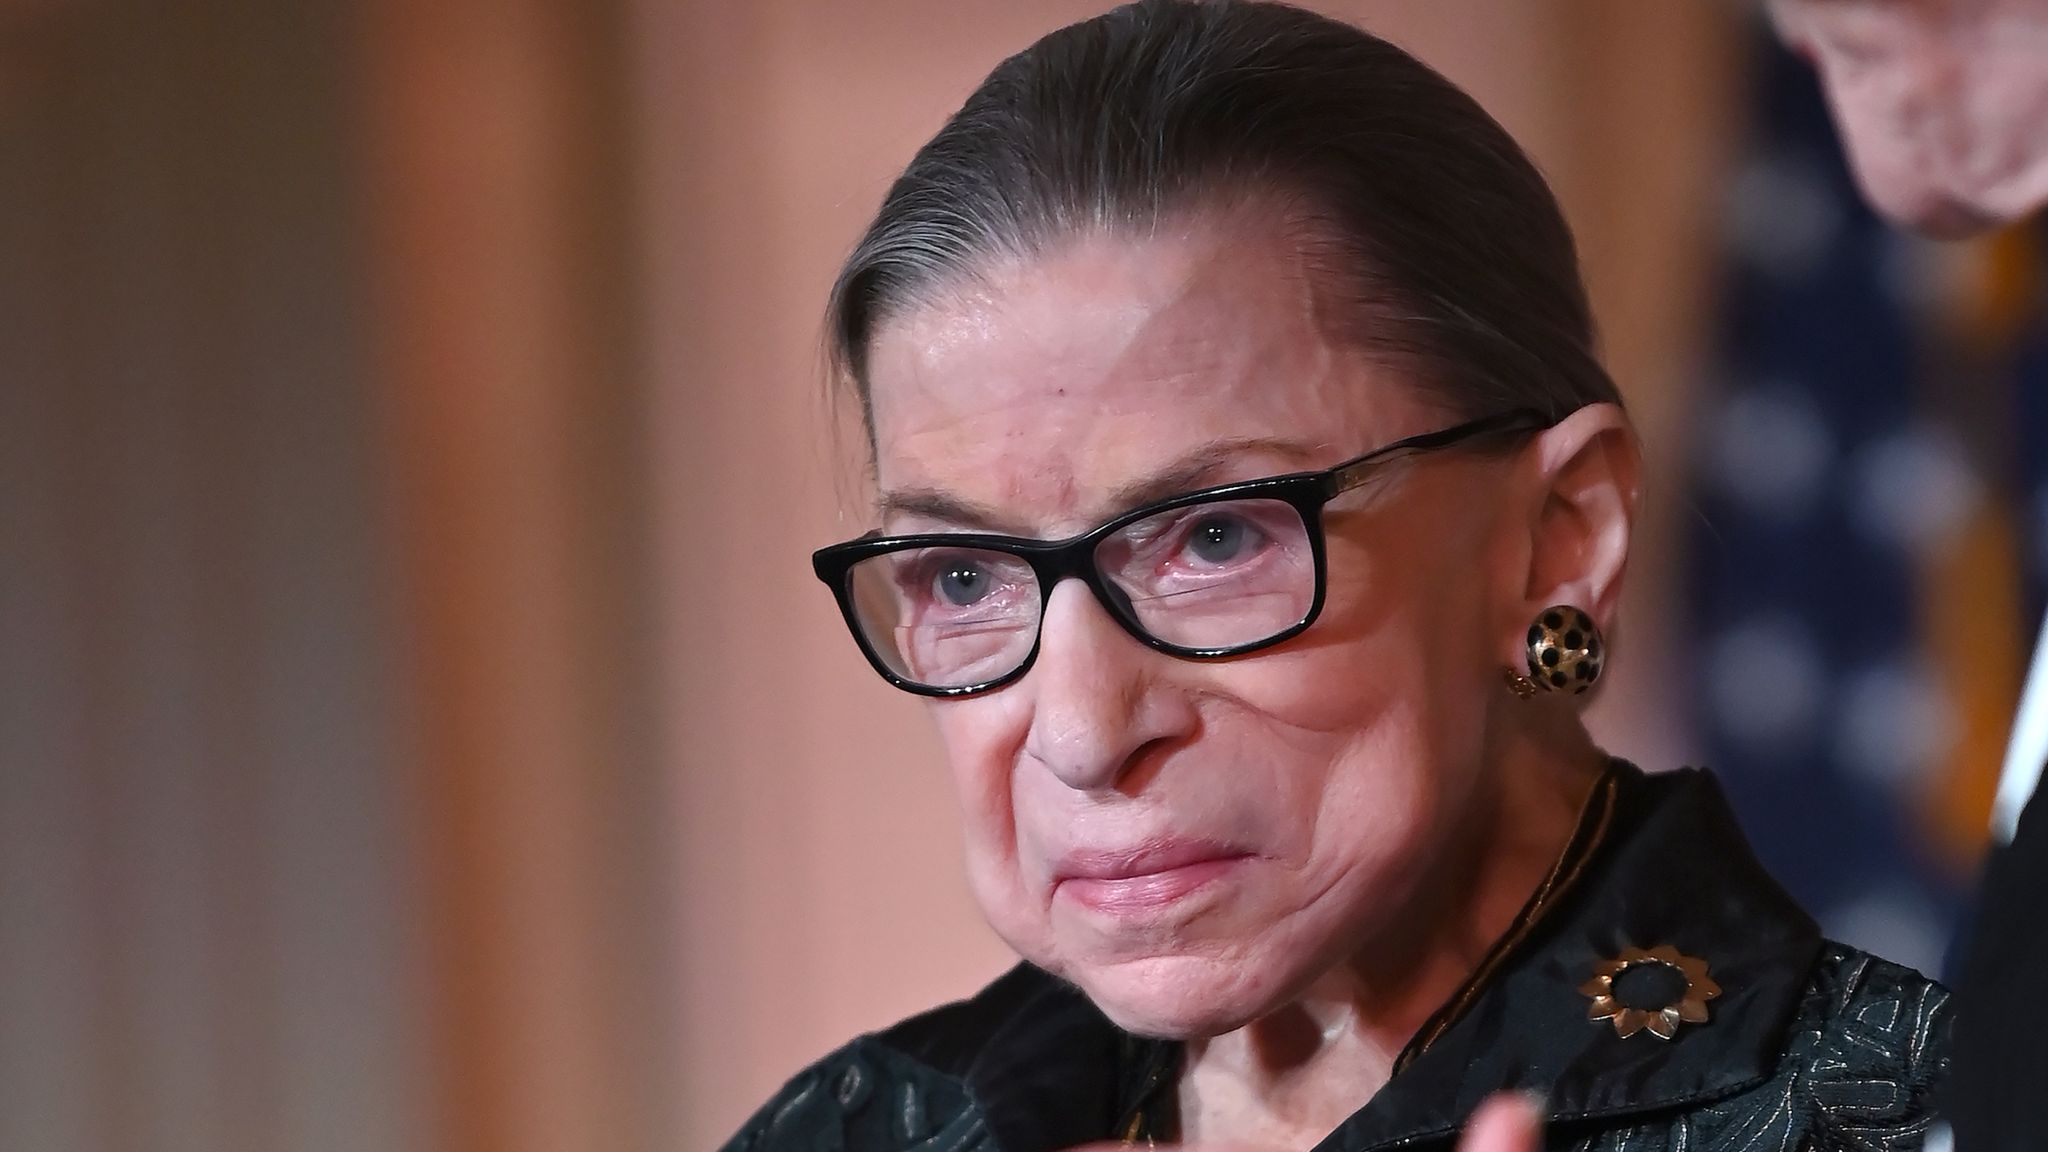 Supreme Court Justice Ruth Bader Ginsburg Dubbed The Notorious Rbg Has Died She Was 87 0793